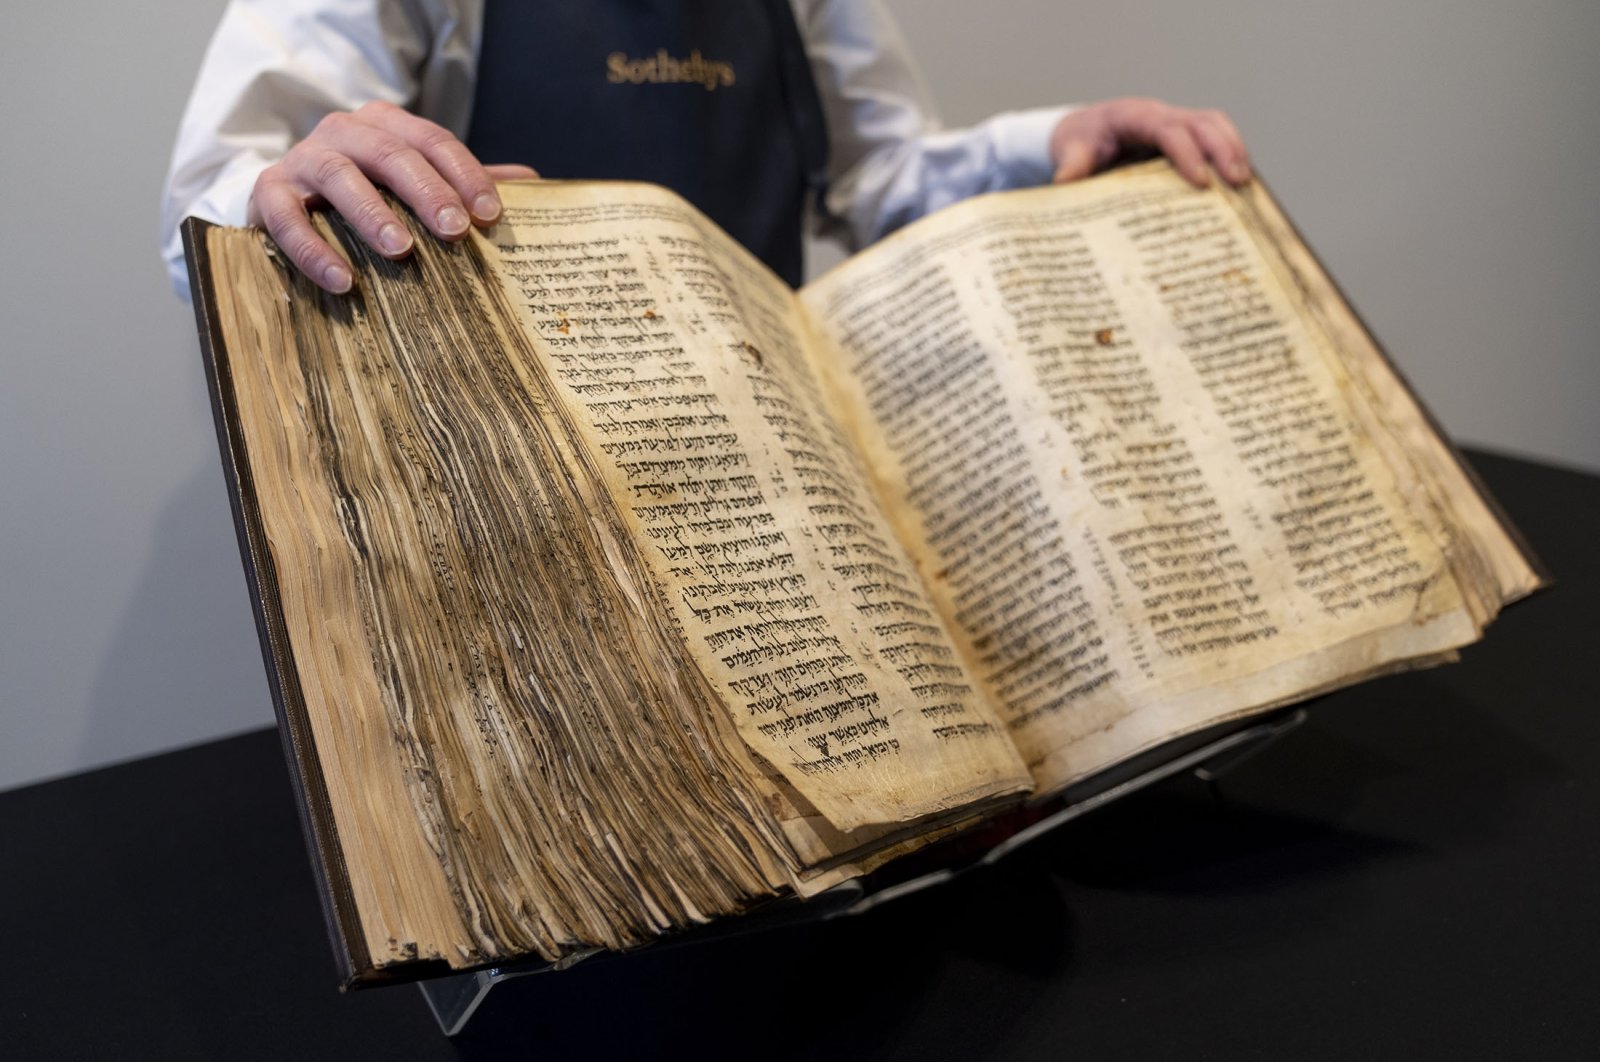 Sotheby&#039;s unveils the Codex Sassoon for auction, at Manhattan Borough of New York, U.S., Feb. 15, 2023. (AP Photo)